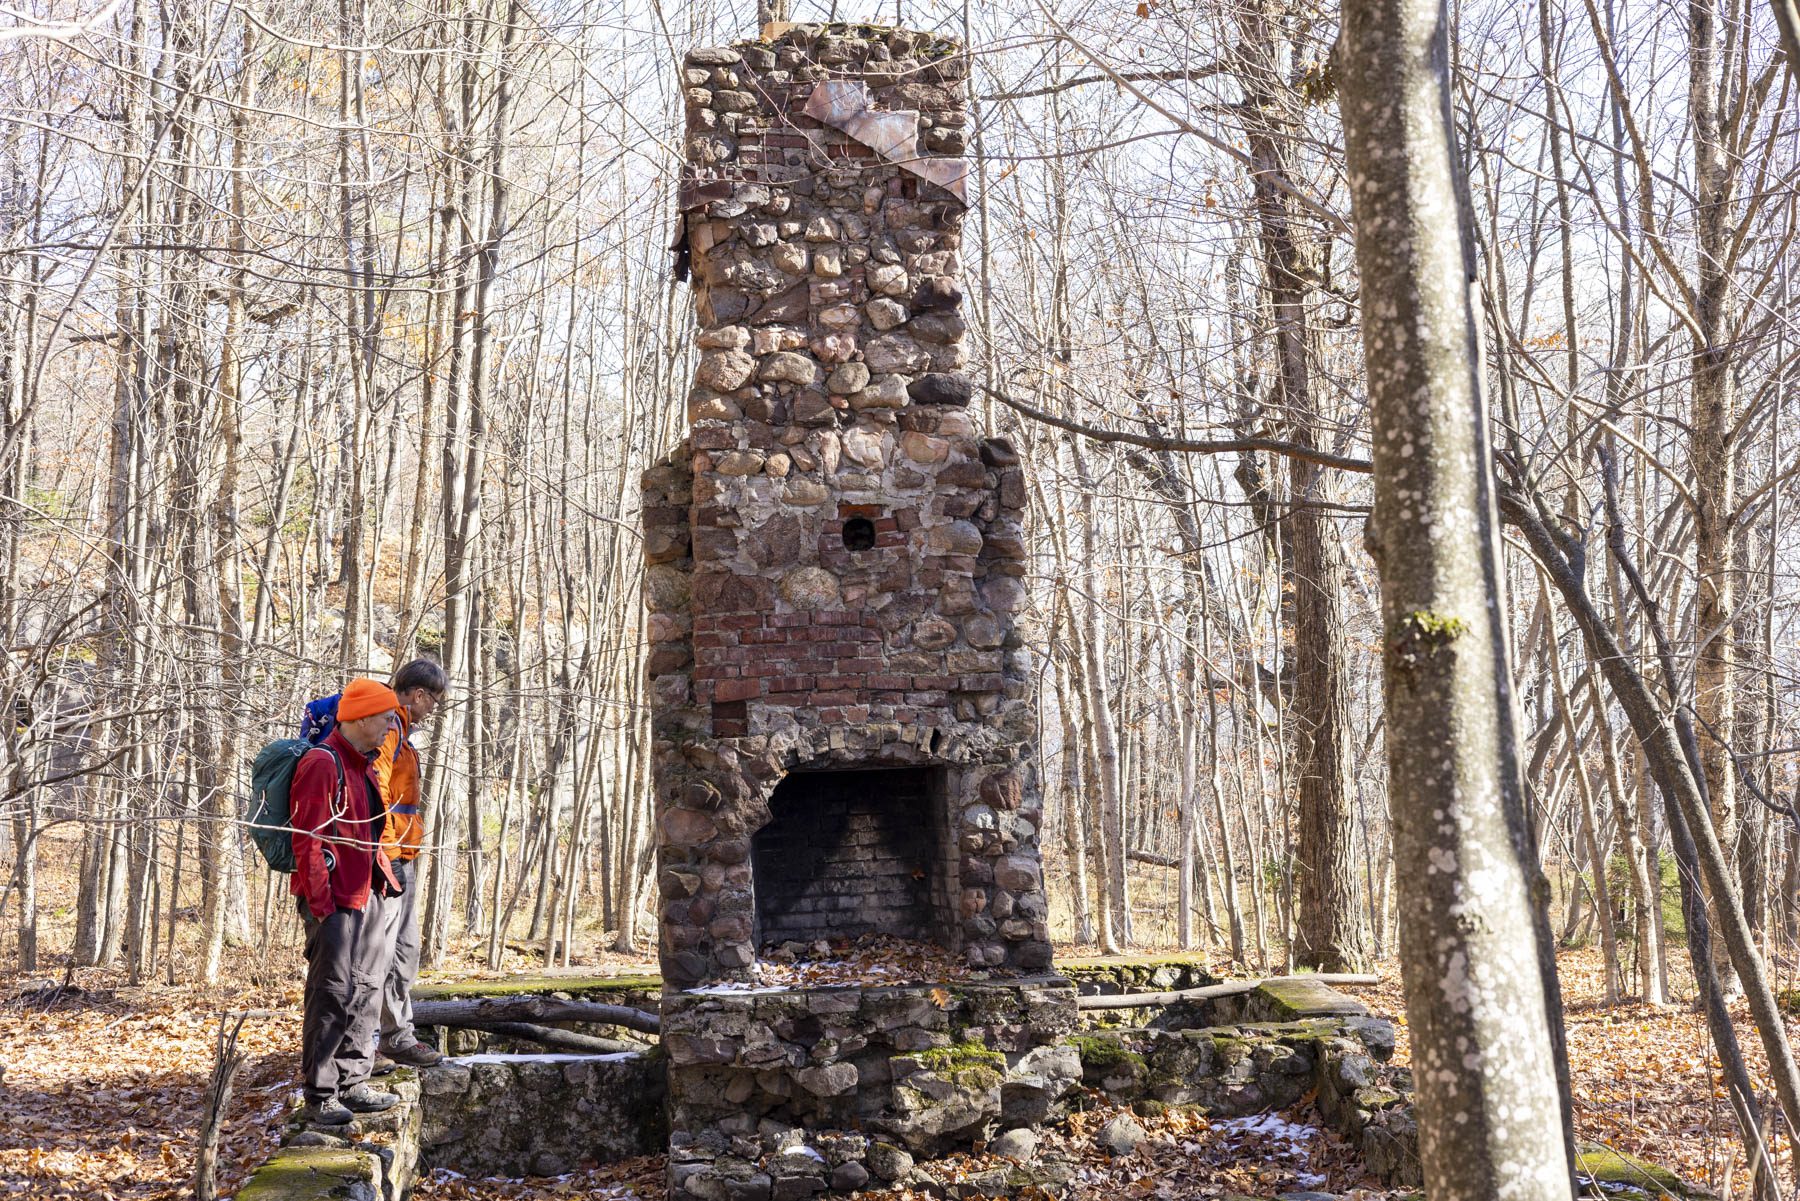 The remains of the fire observer's cabin. Photo by Mike Lynch
